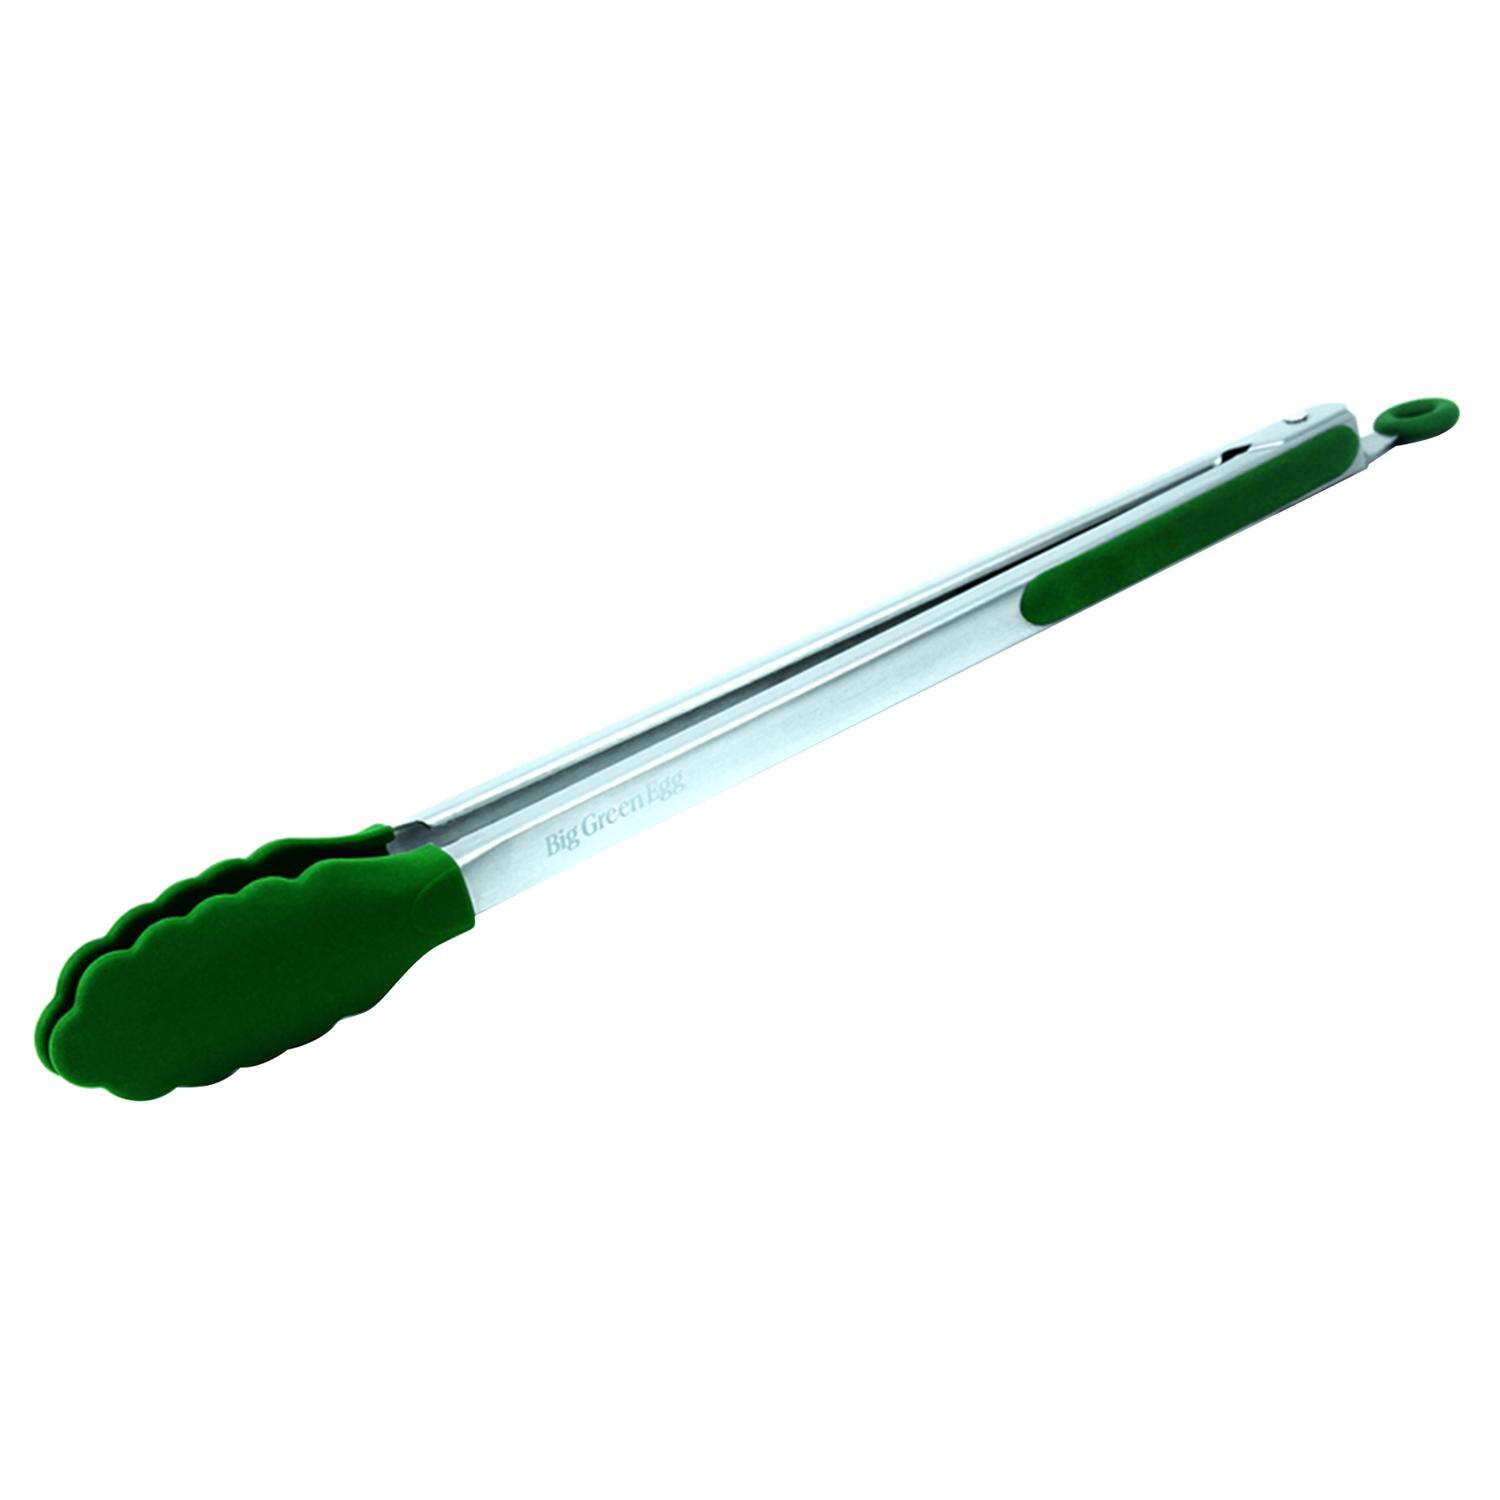 BGE SILICONE/STAINLESS STEEL GRILL TONGS 16"